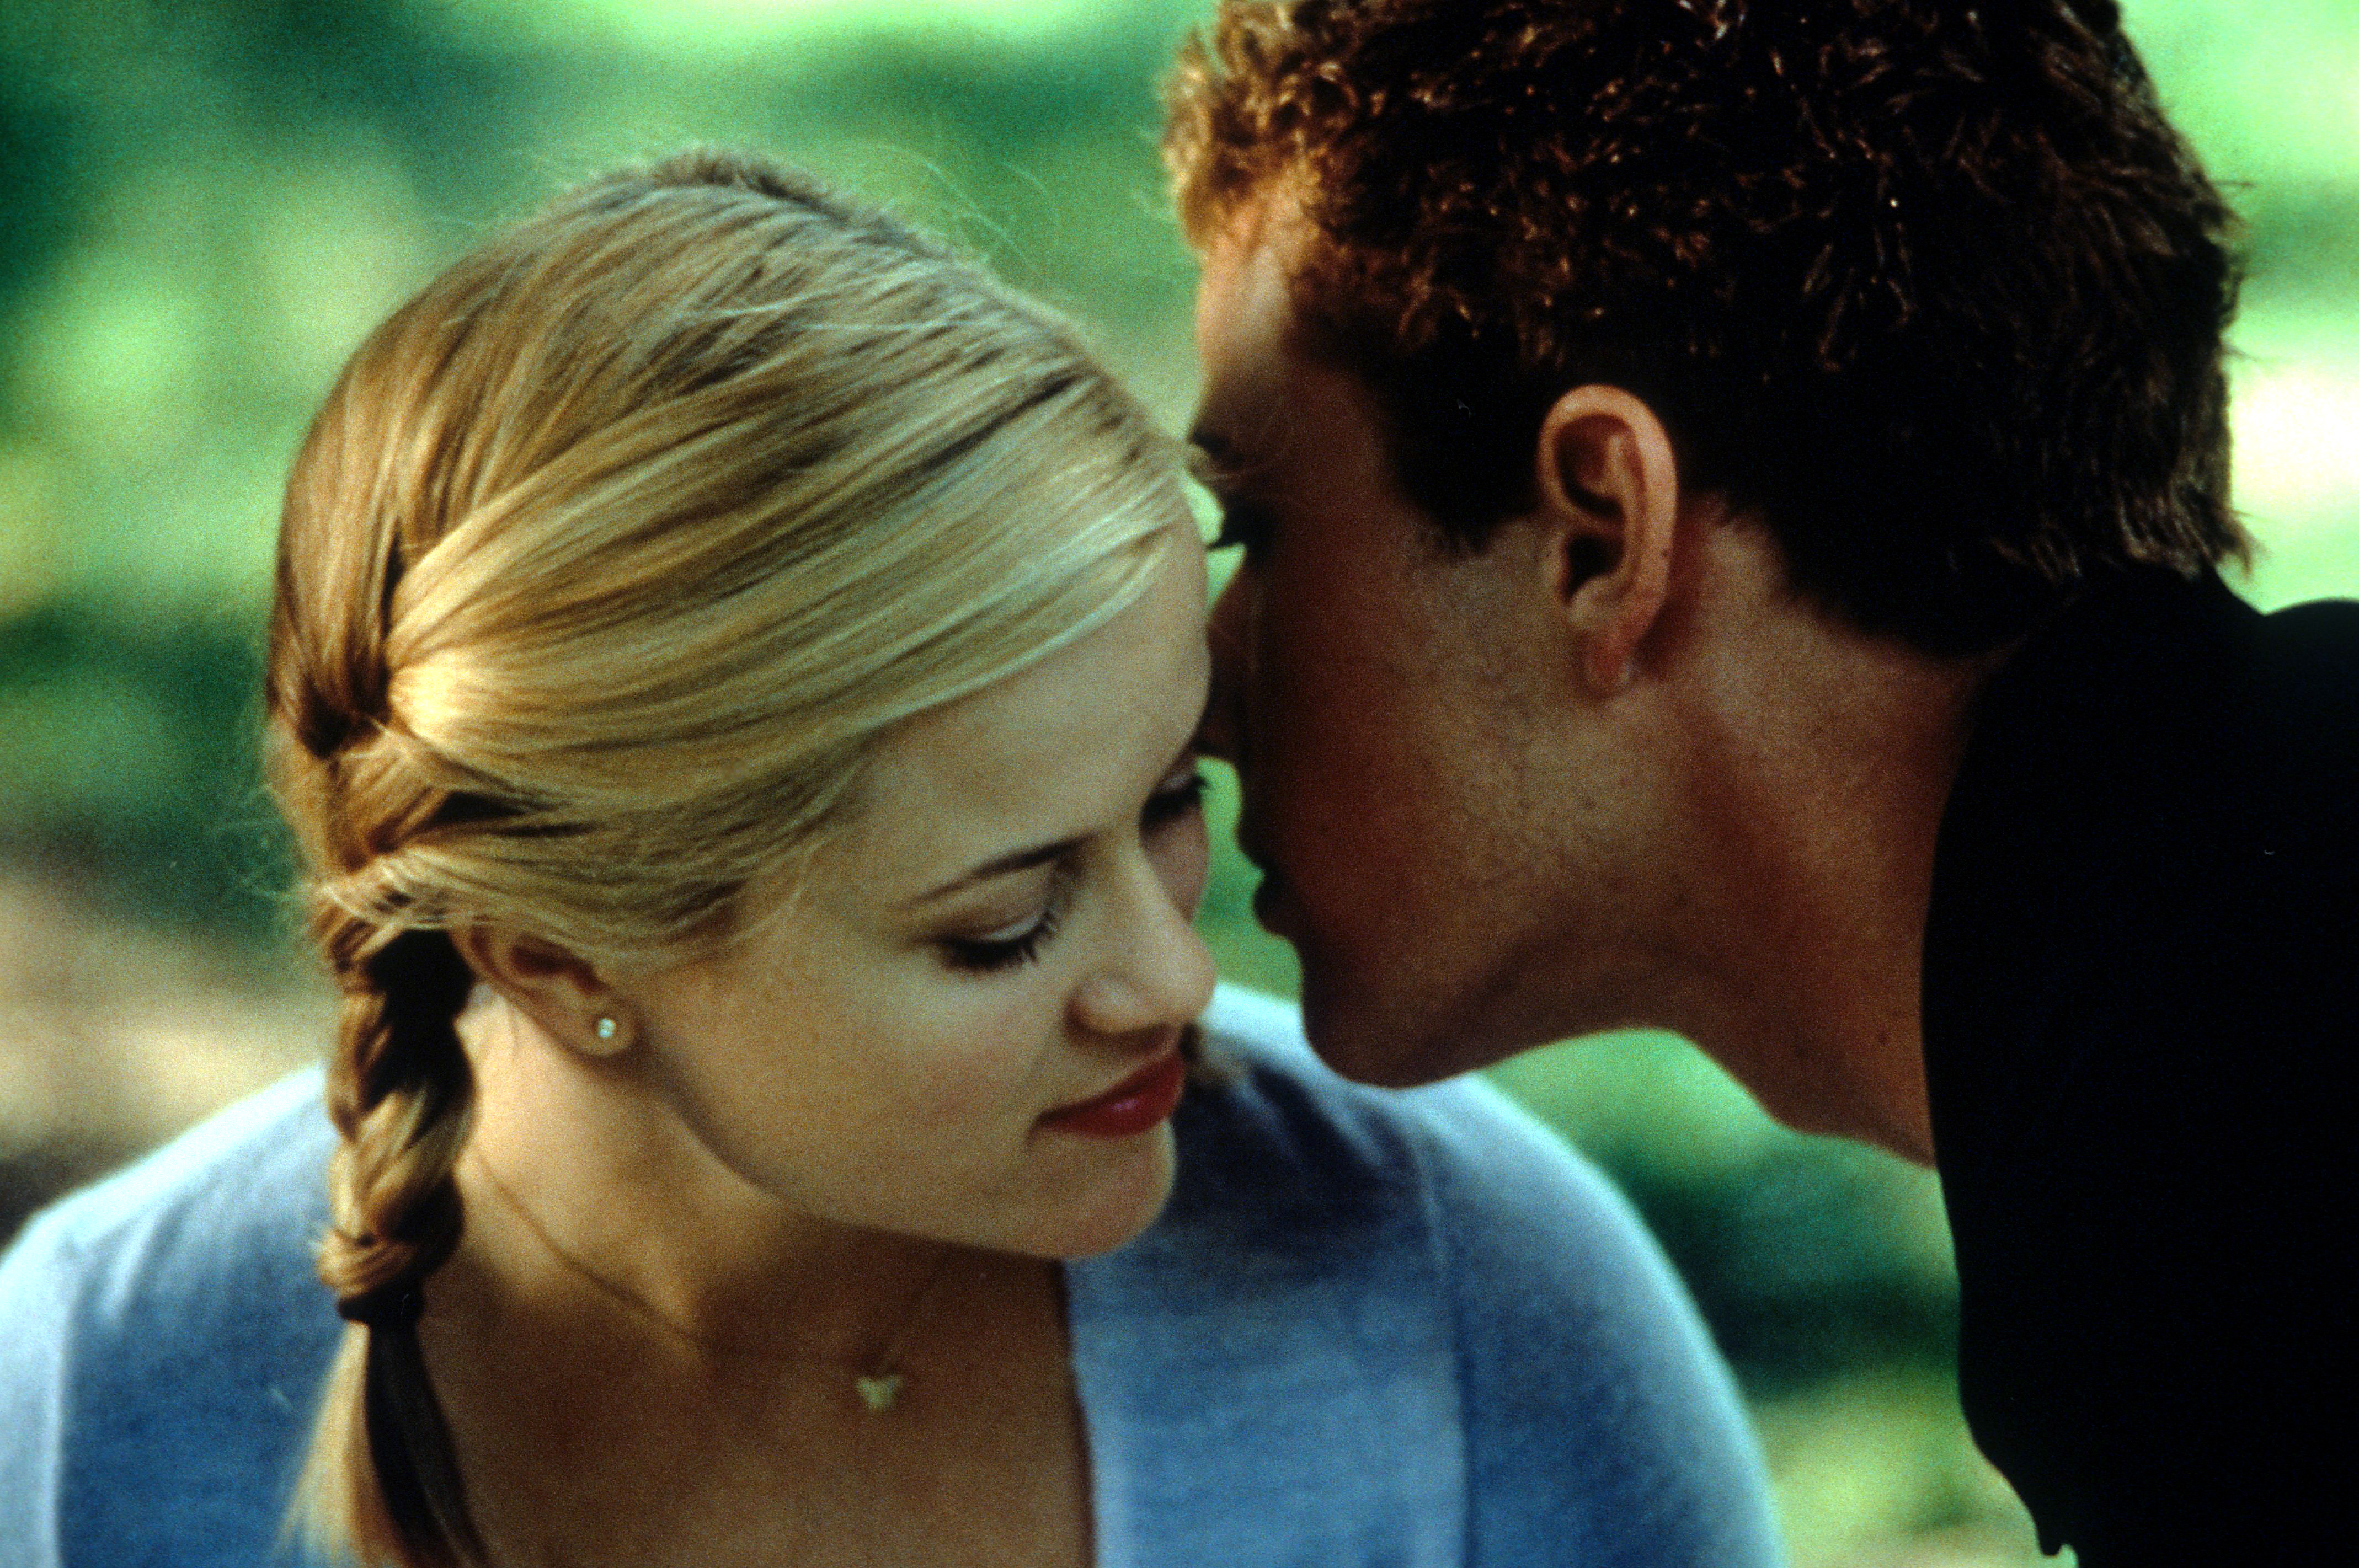 Reese Witherspoon listens as Ryan Phillippe whispers in her ear in a scene from the film "Cruel Intentions" in 1999. | Source: Getty Images